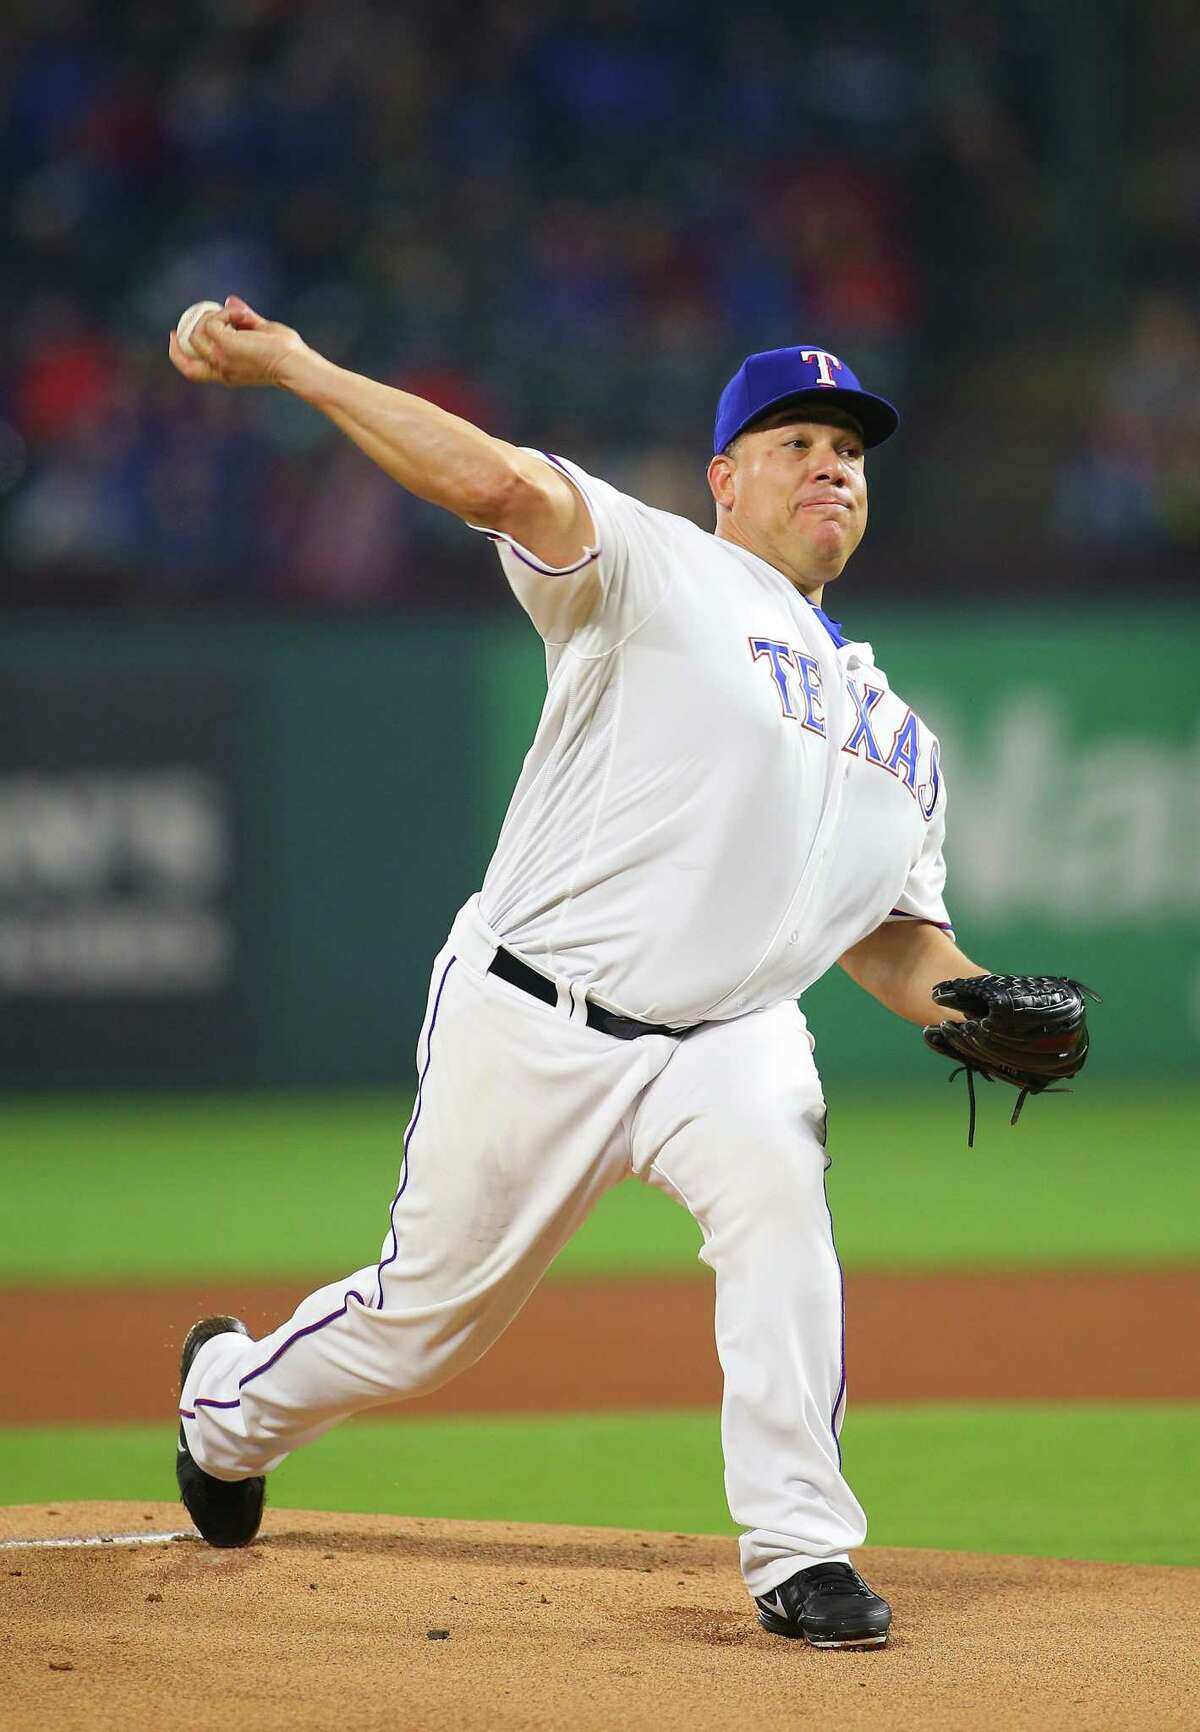 ARLINGTON, TX - APRIL 21: Bartolo Colon #40 of the Texas Rangers throws in the first inning against the Seattle Mariners at Globe Life Park in Arlington on April 21, 2018 in Arlington, Texas. (Photo by Rick Yeatts/Getty Images)